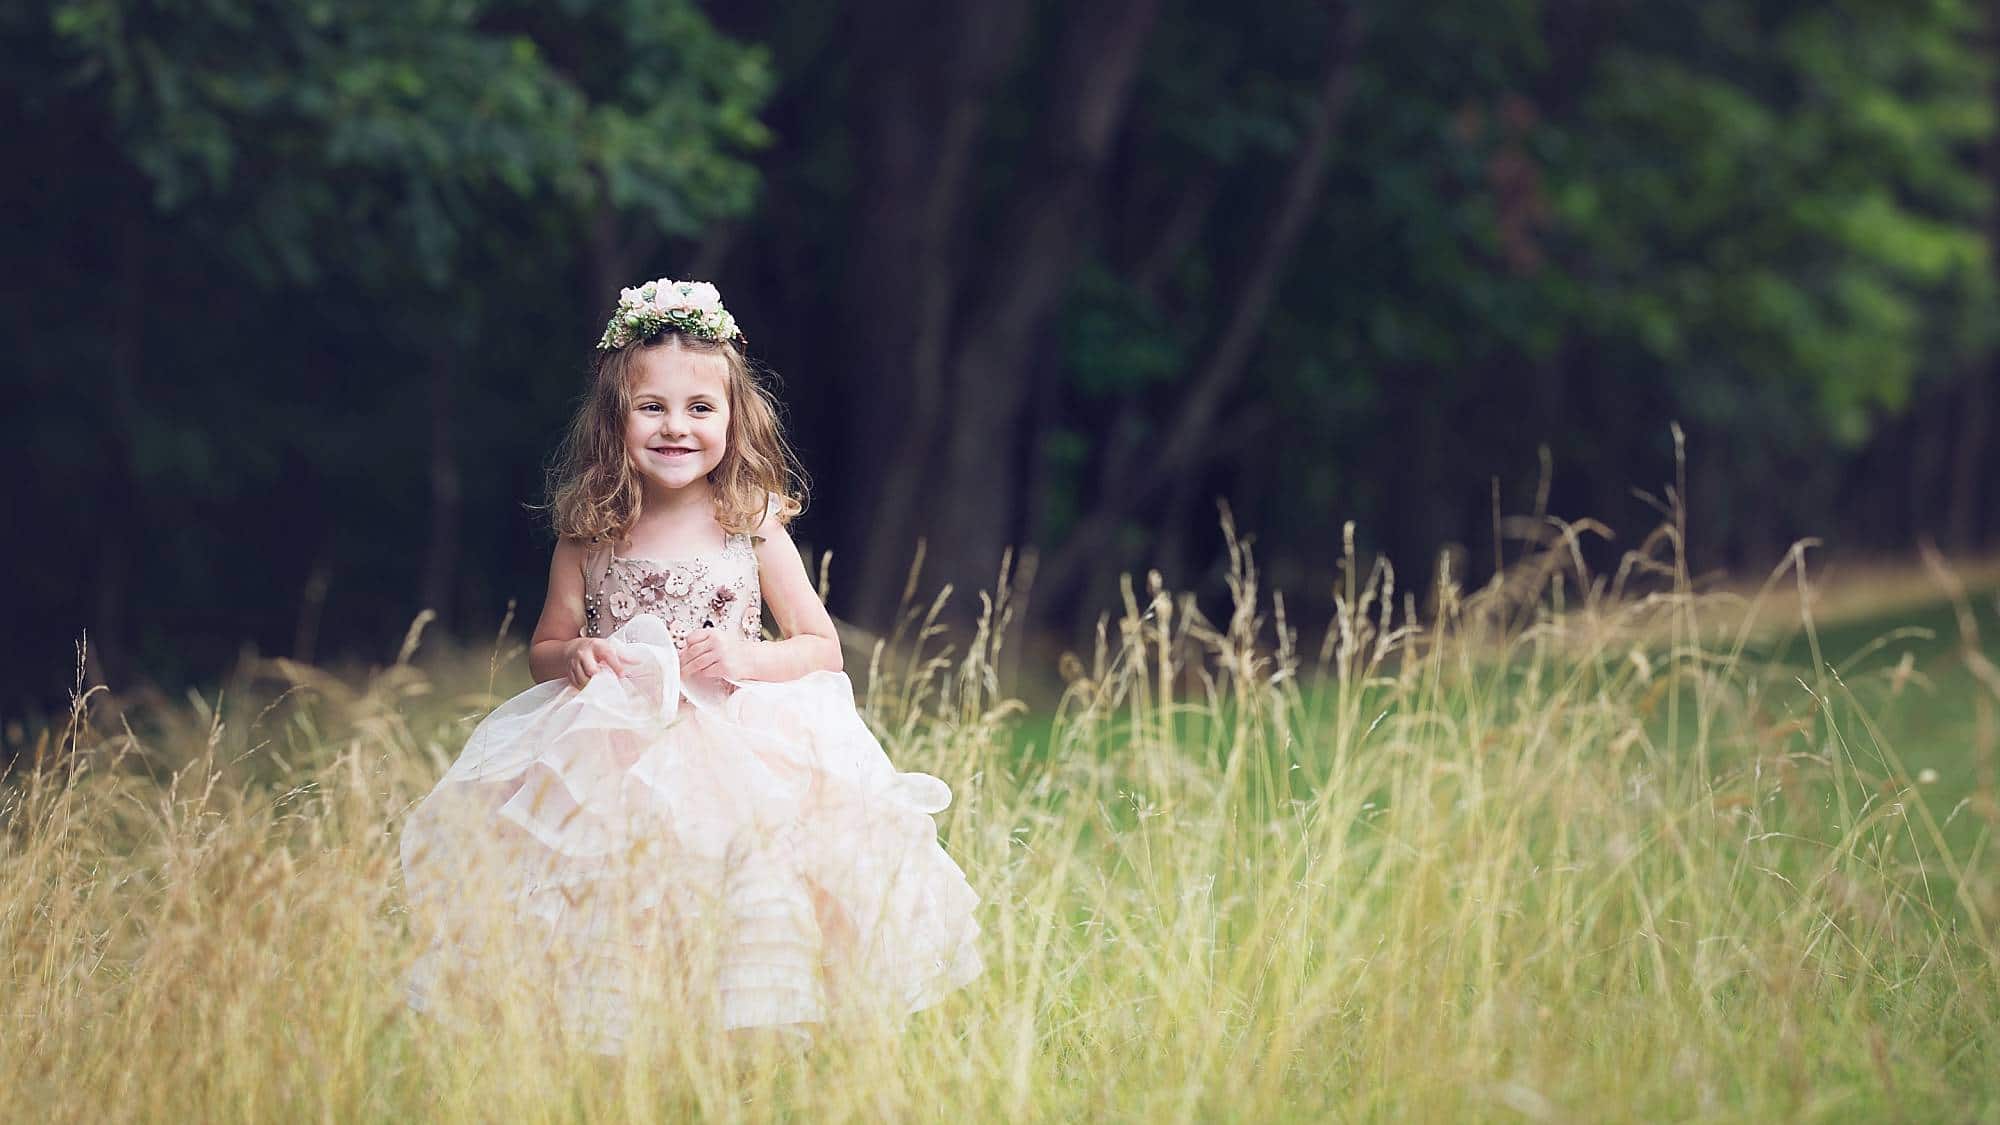 image of a little girl with curls wearing a pink princess dress and flower crown, standing in tall golden grasses